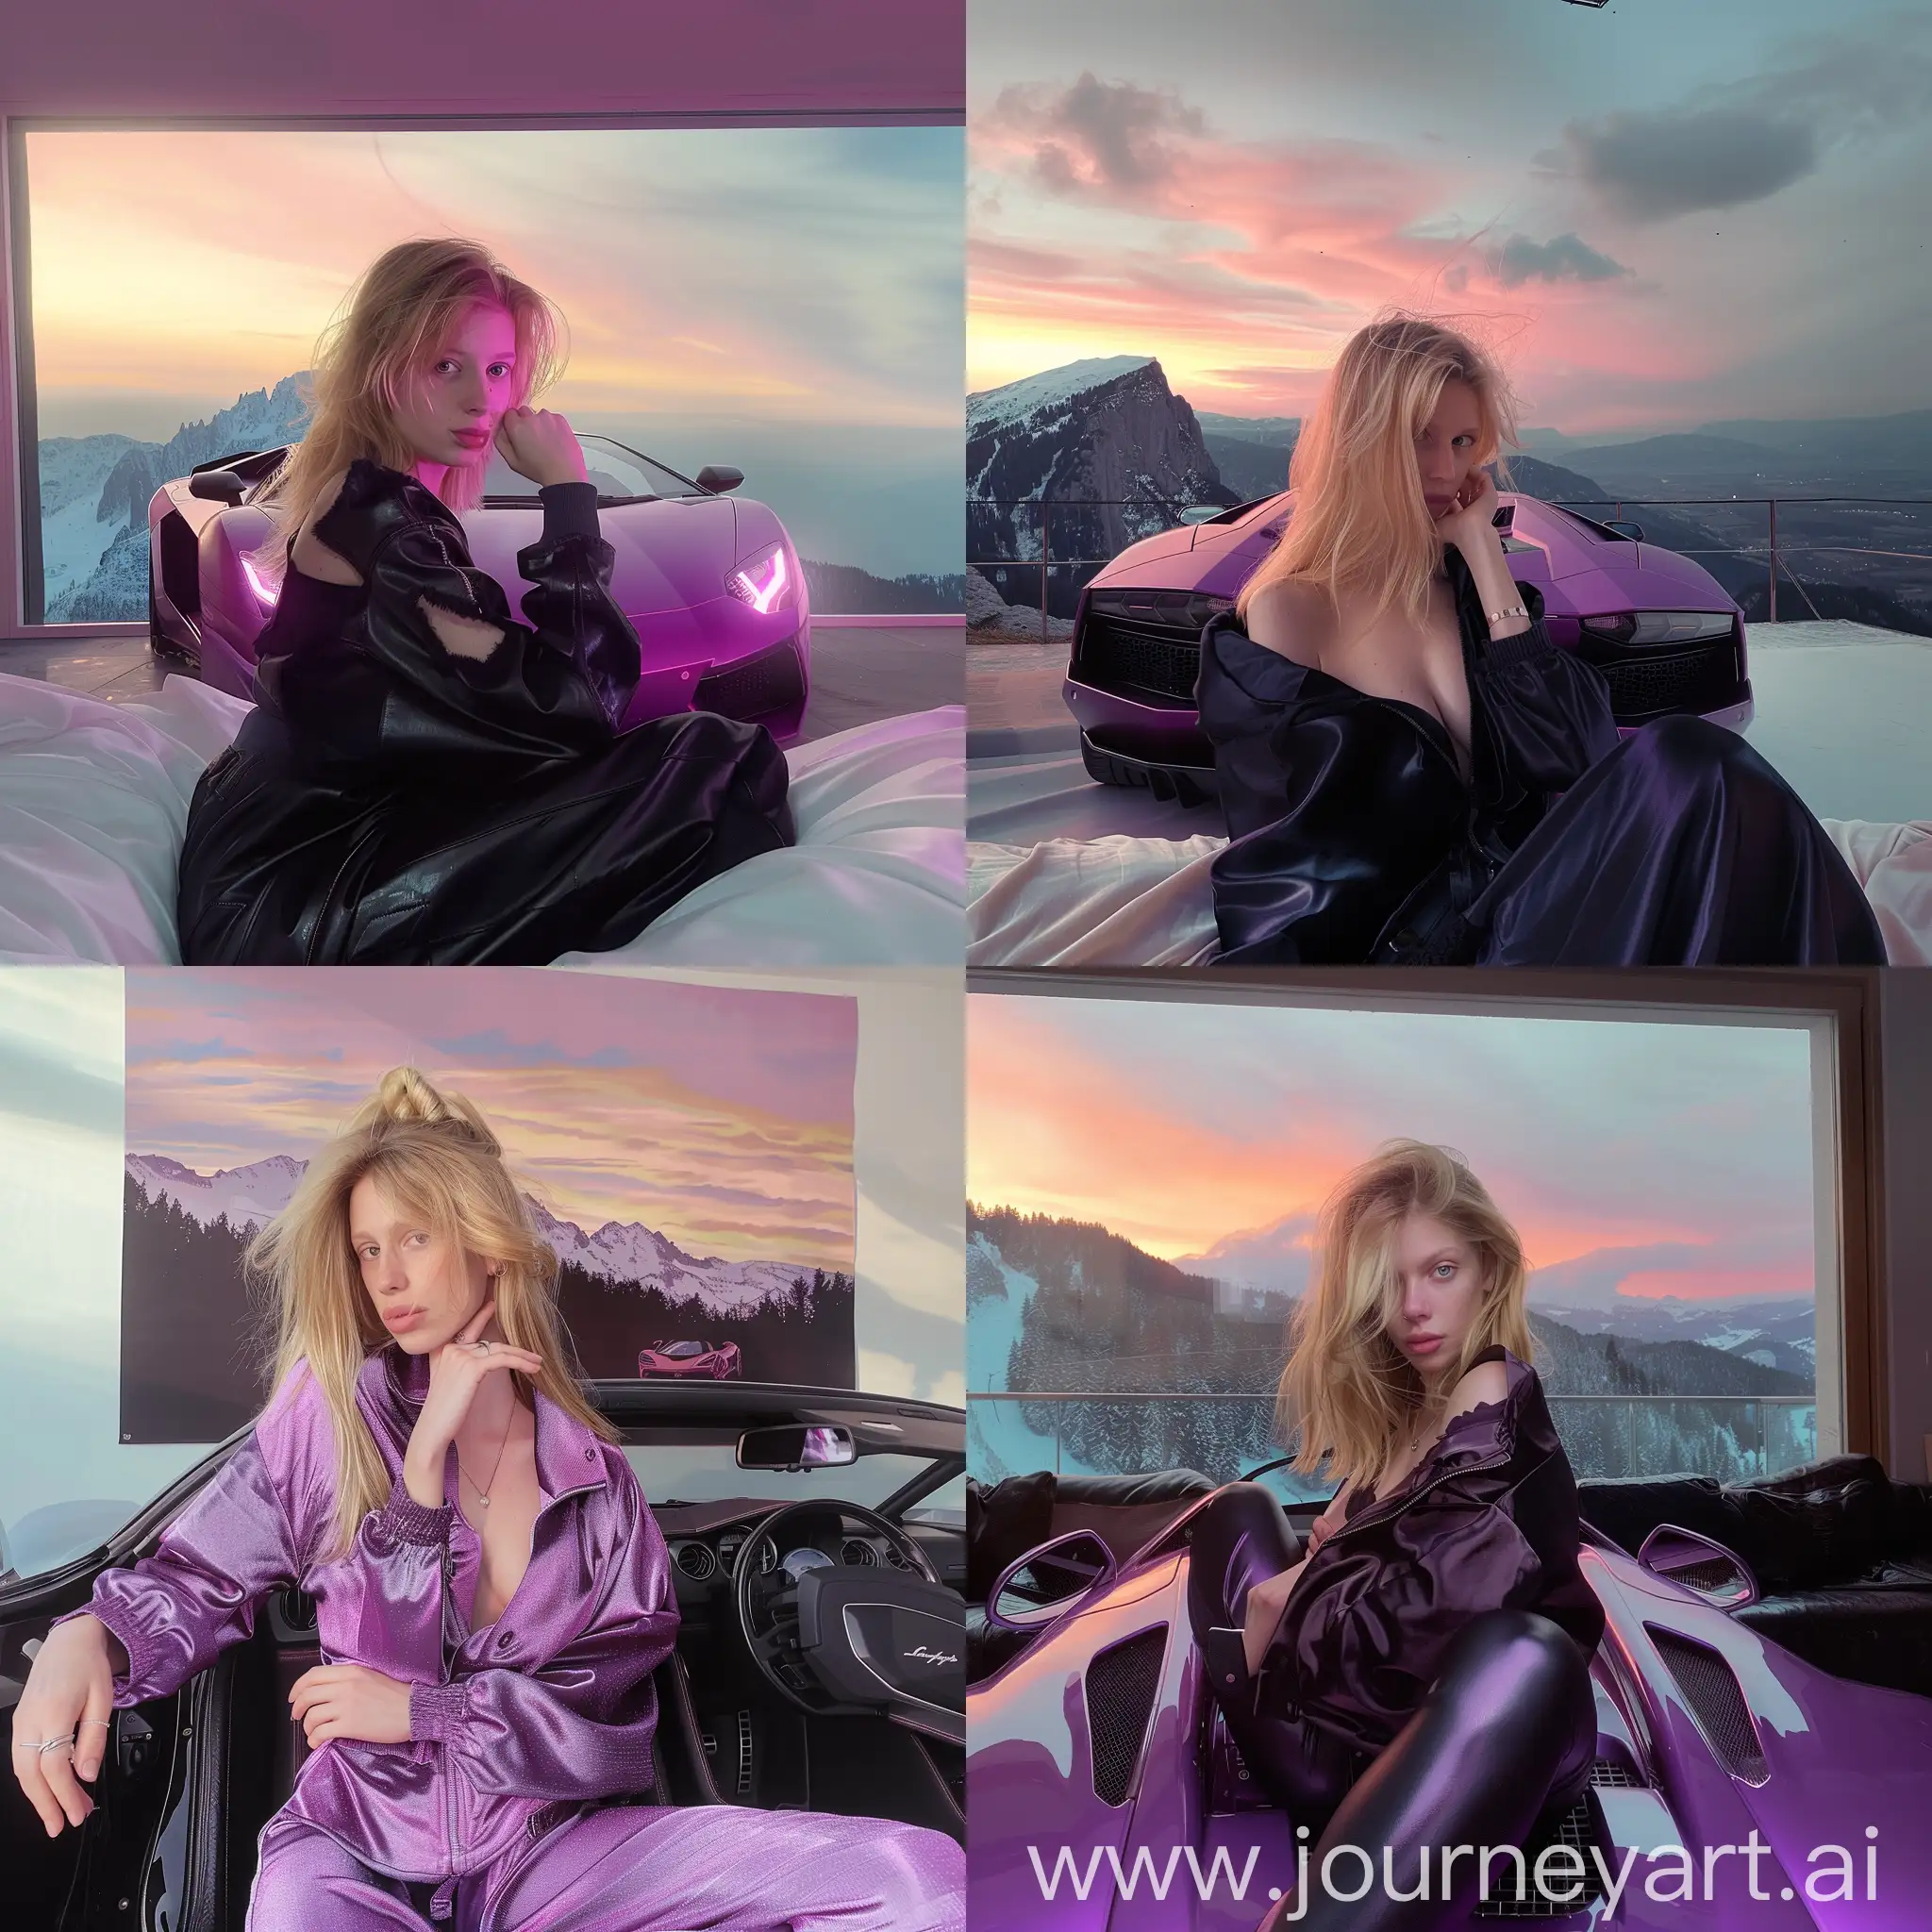 Girl-Sitting-on-Purple-Lamborghini-with-Mountain-and-Sunset-Background-in-Pink-Hues